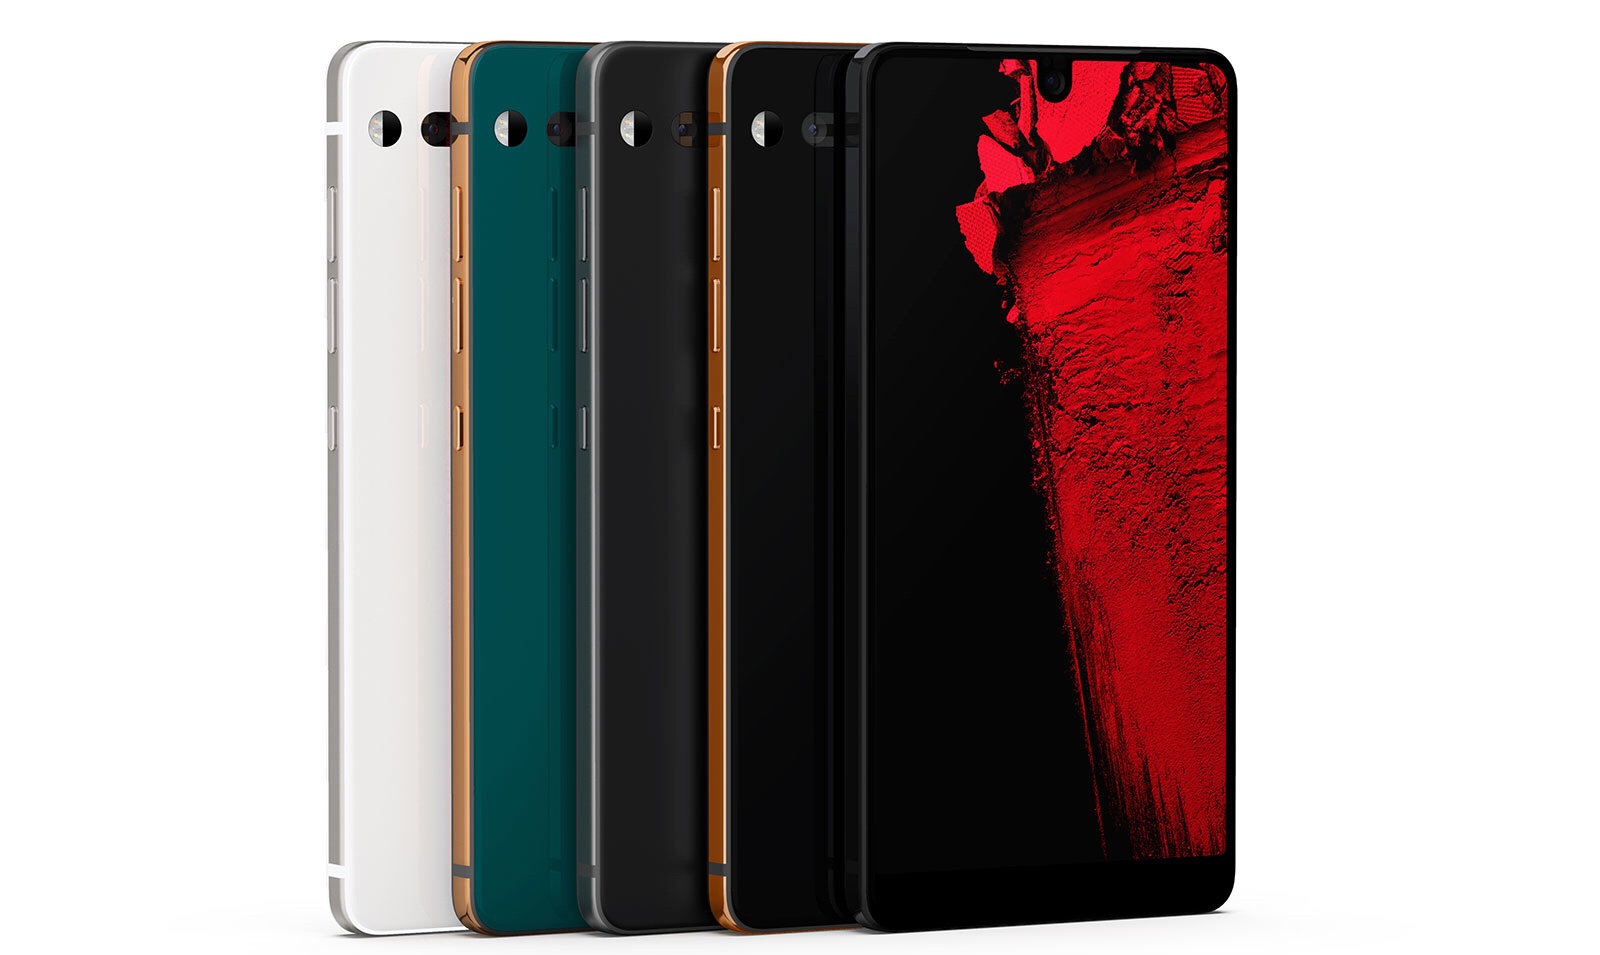 Essential’s PH-1 phone is getting some new limited edition color choices